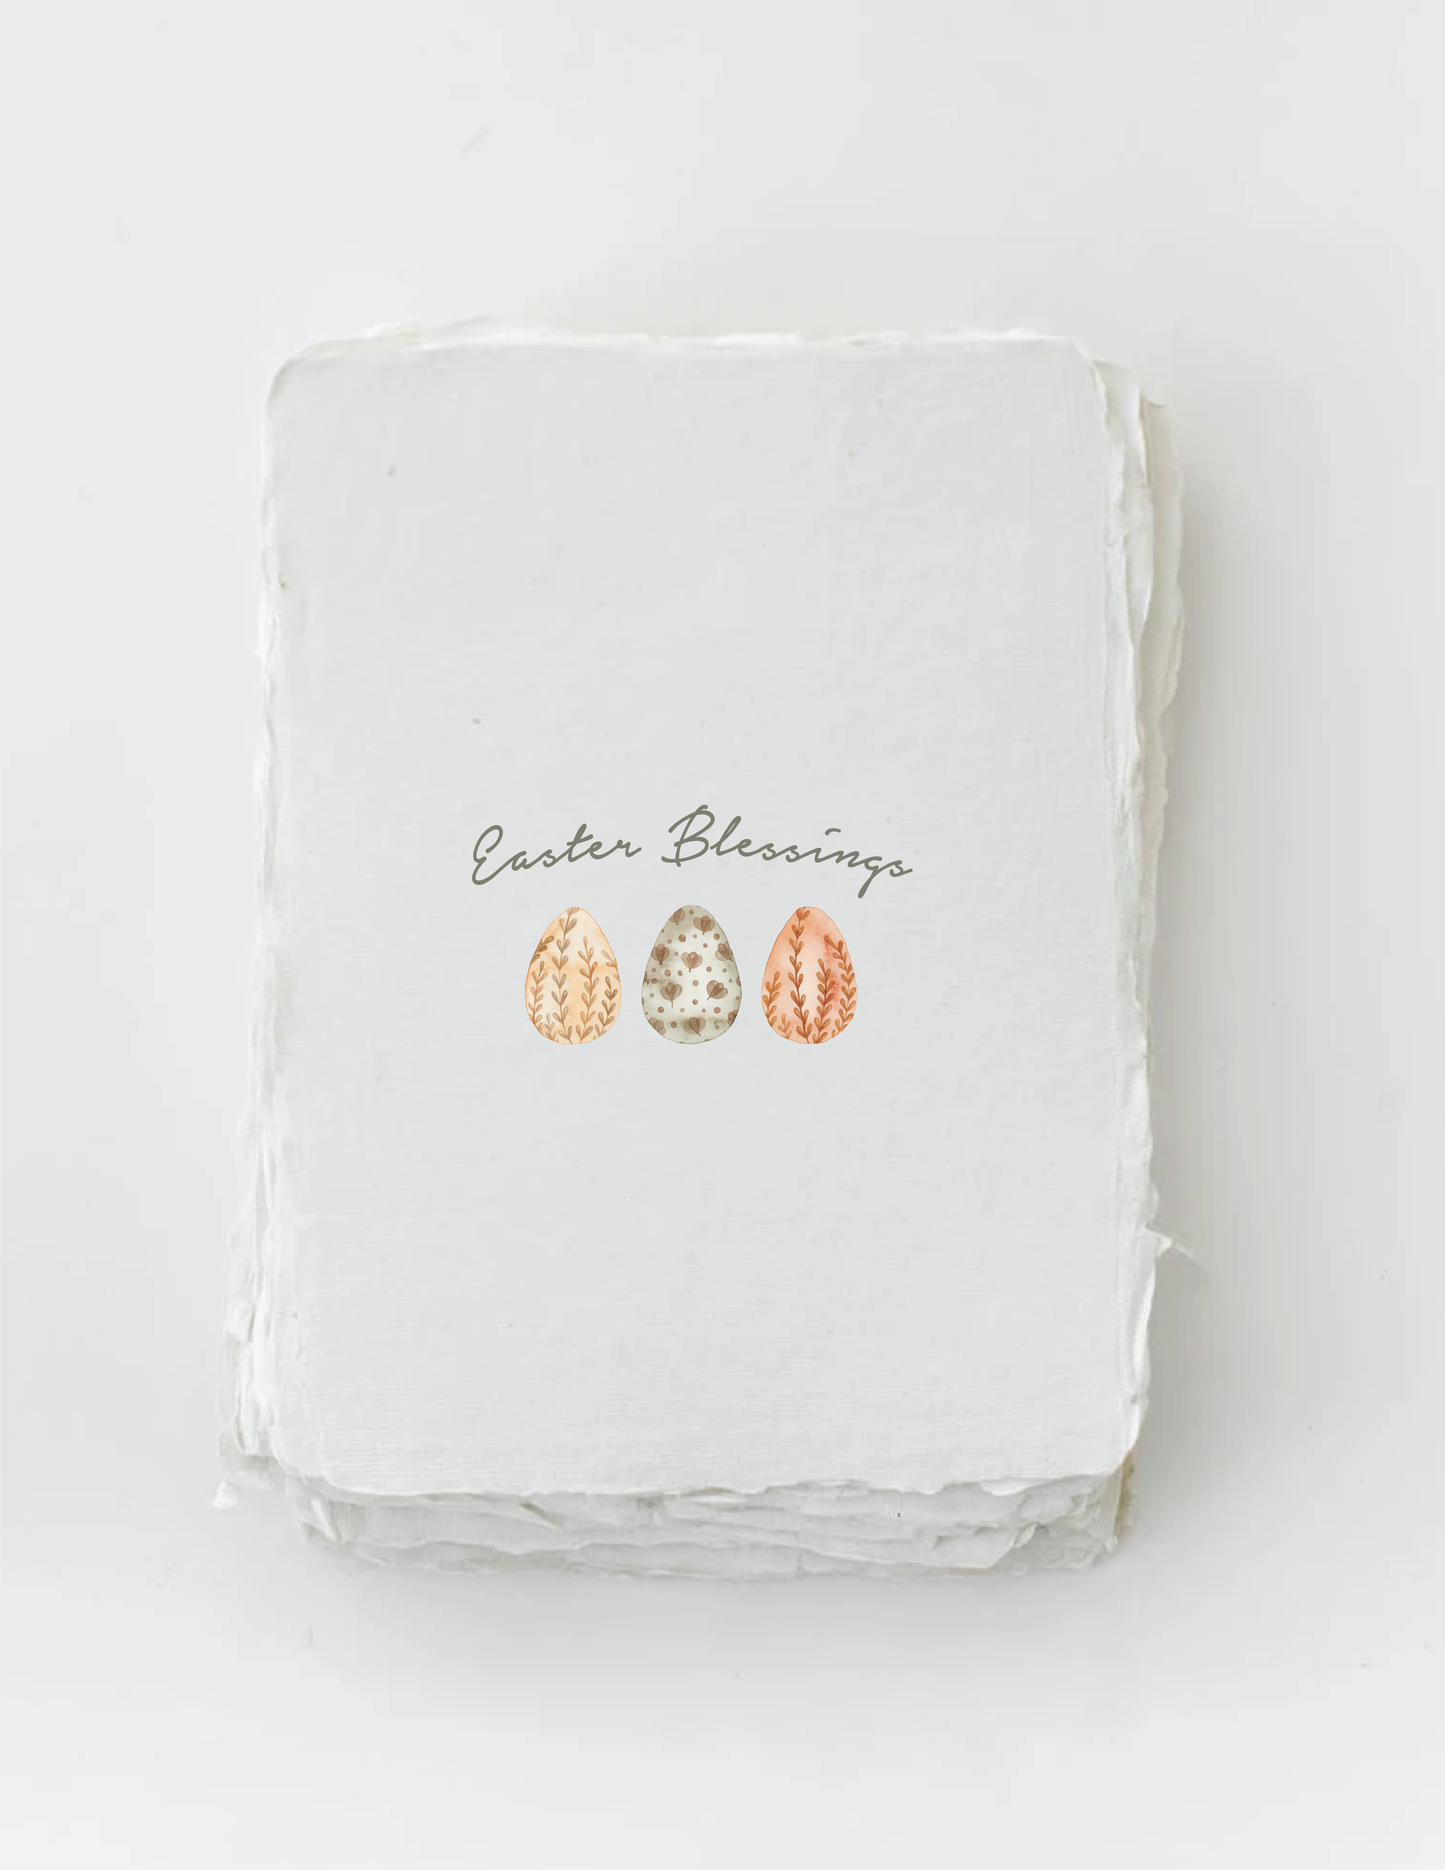 Paper Baristas - "Easter Blessings" Easter Egg Eco-Friendly Greeting Card